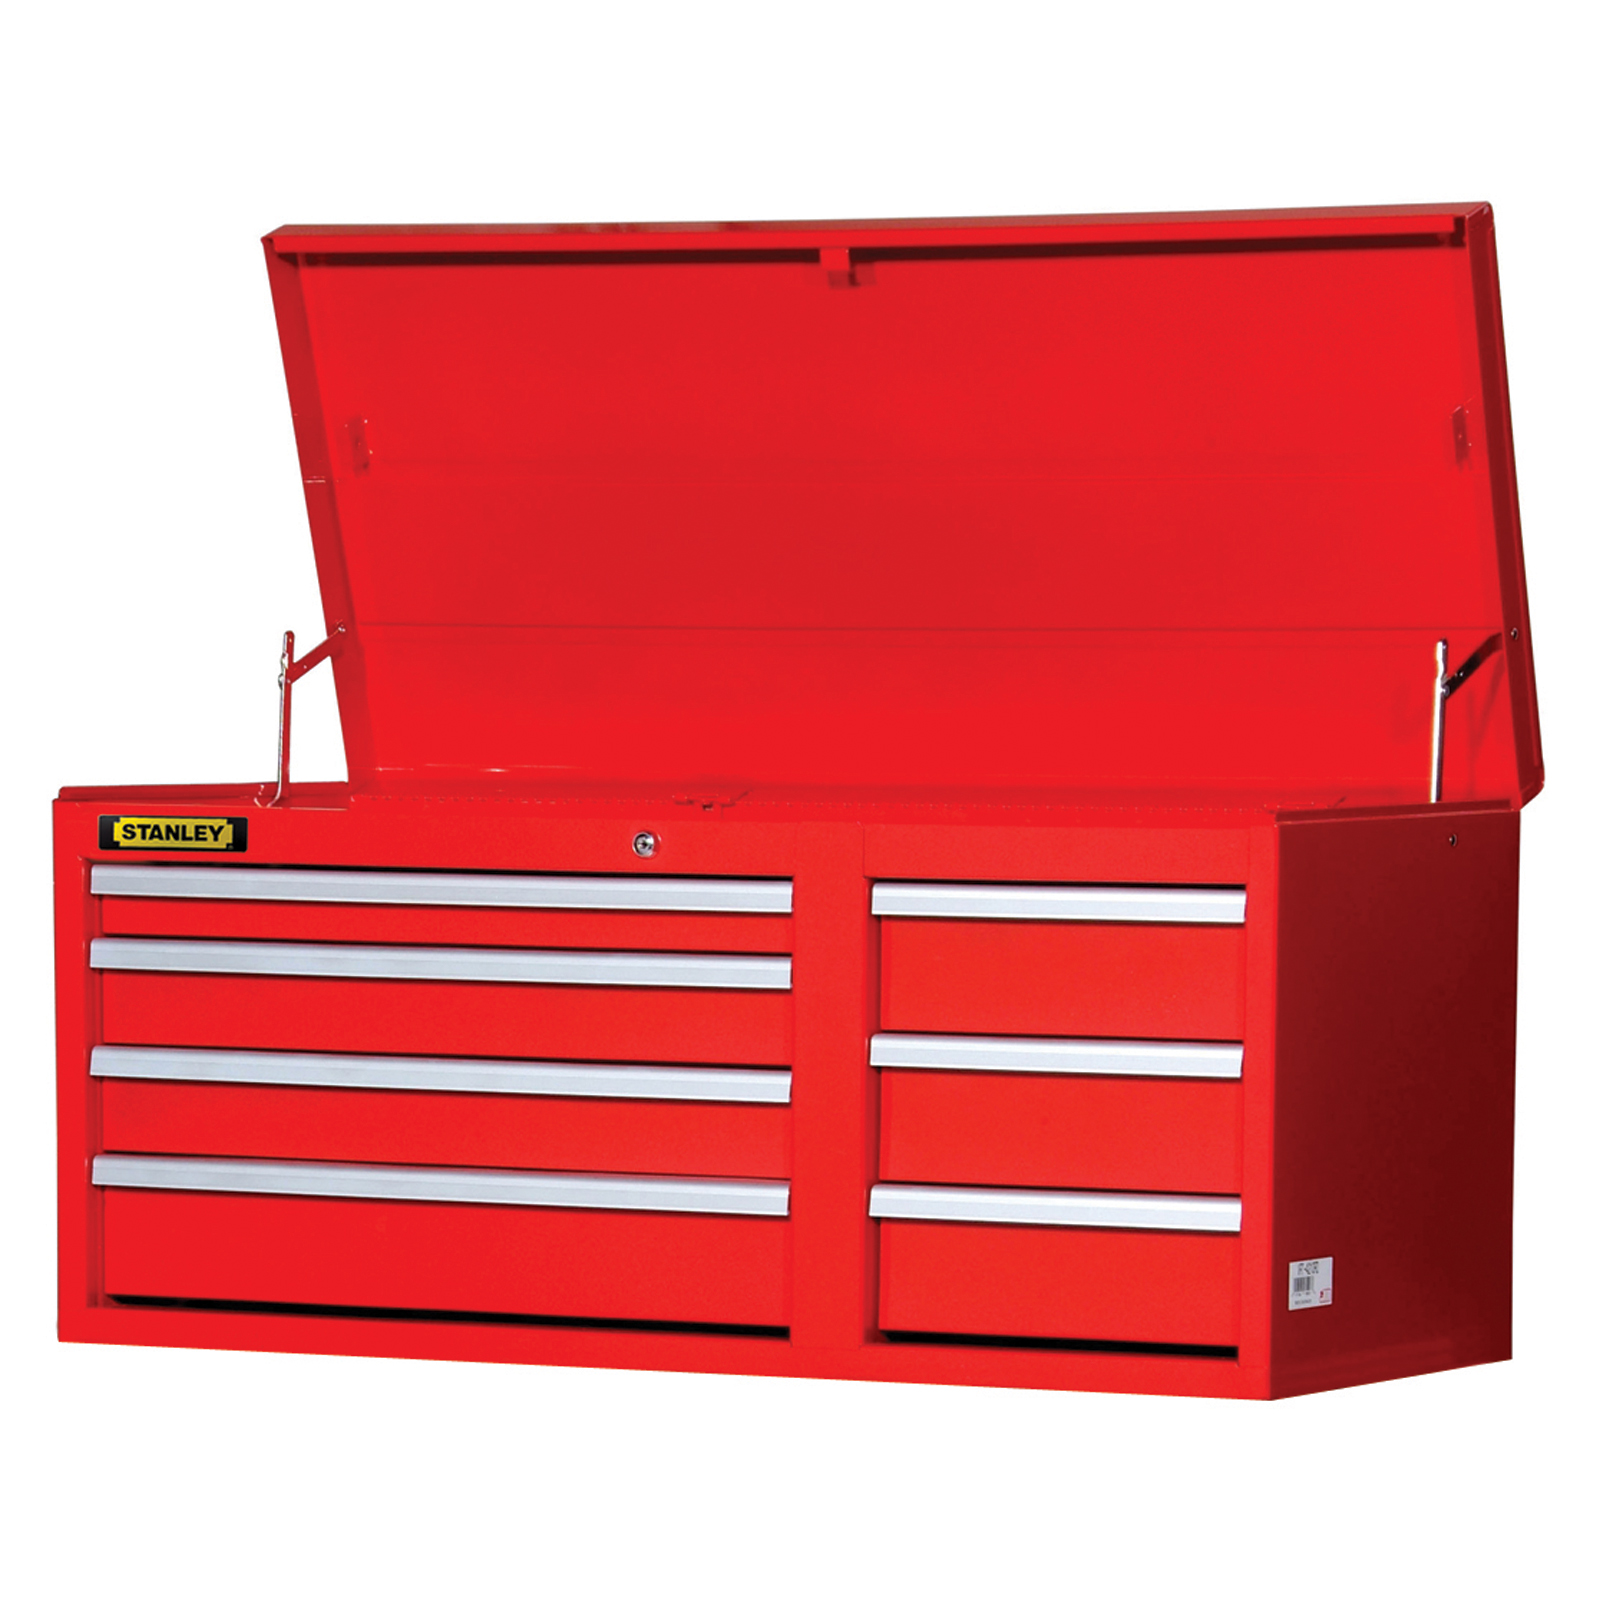 Stanley 42" 7-Drawer Ball Bearing Slides Top Chest, Red, PLUS FREE SHIPPING